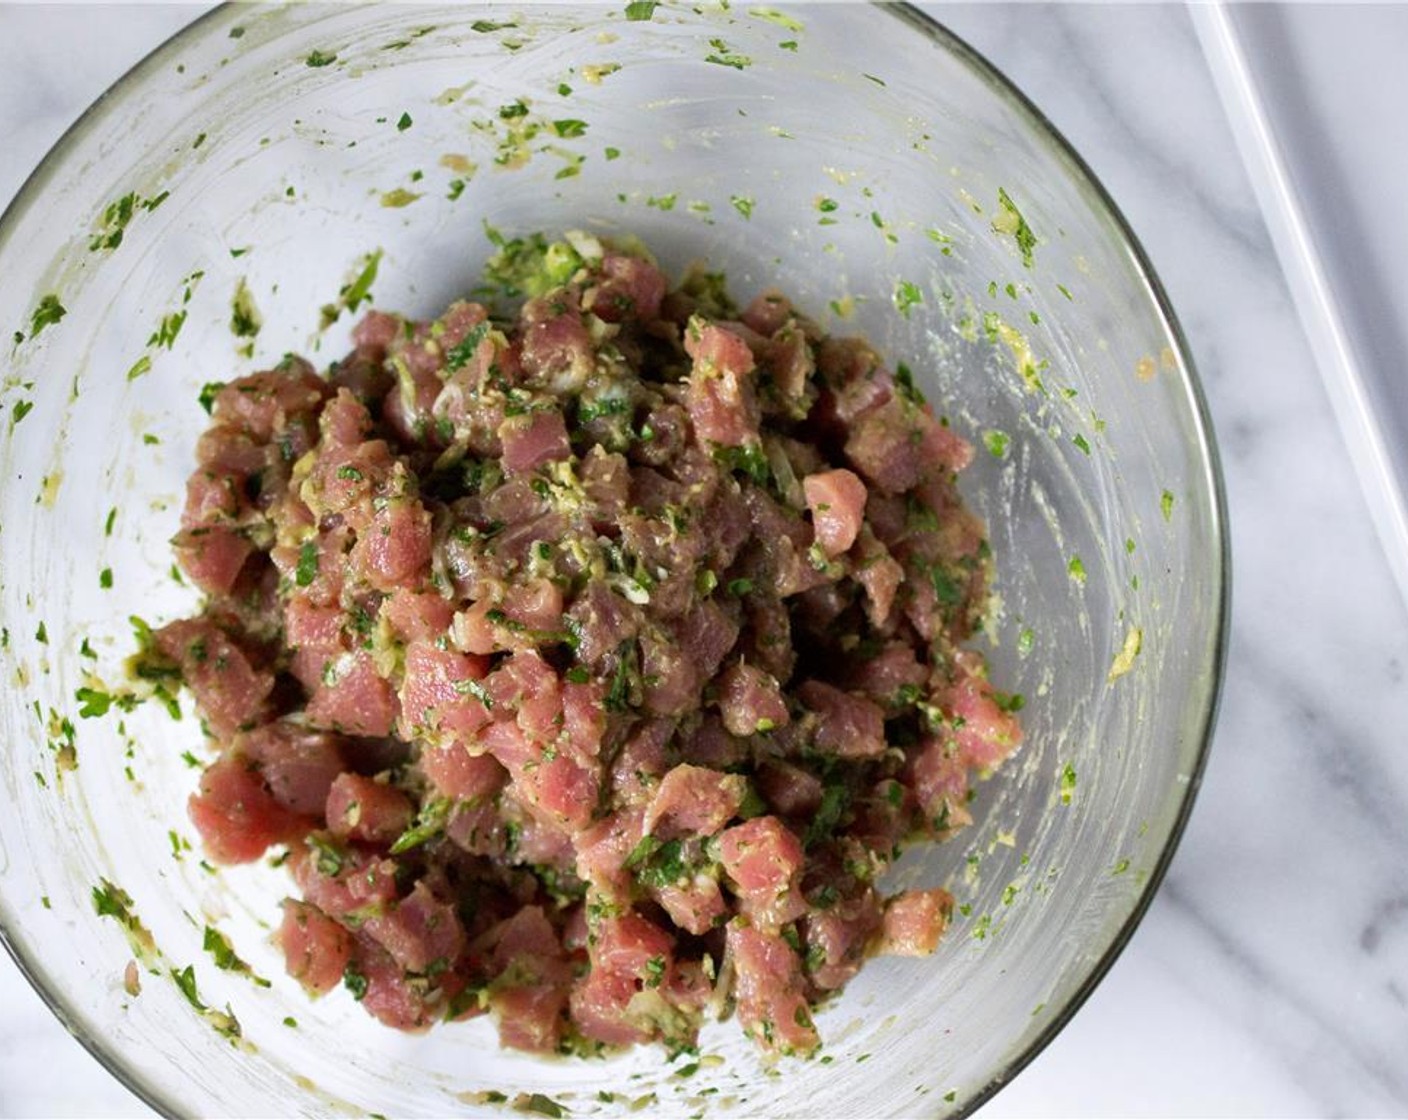 step 2 Add the Scallion (1 bunch), Fresh Cilantro (2 Tbsp), Fresh Ginger (1 tsp), Red Bird's Eye Chili Pepper (1), Avocado (1/2), Kosher Salt (3/4 tsp), and Ground Black Pepper (1/4 tsp) to the tuna. Gently work with your hands to incorporate all of the ingredients.